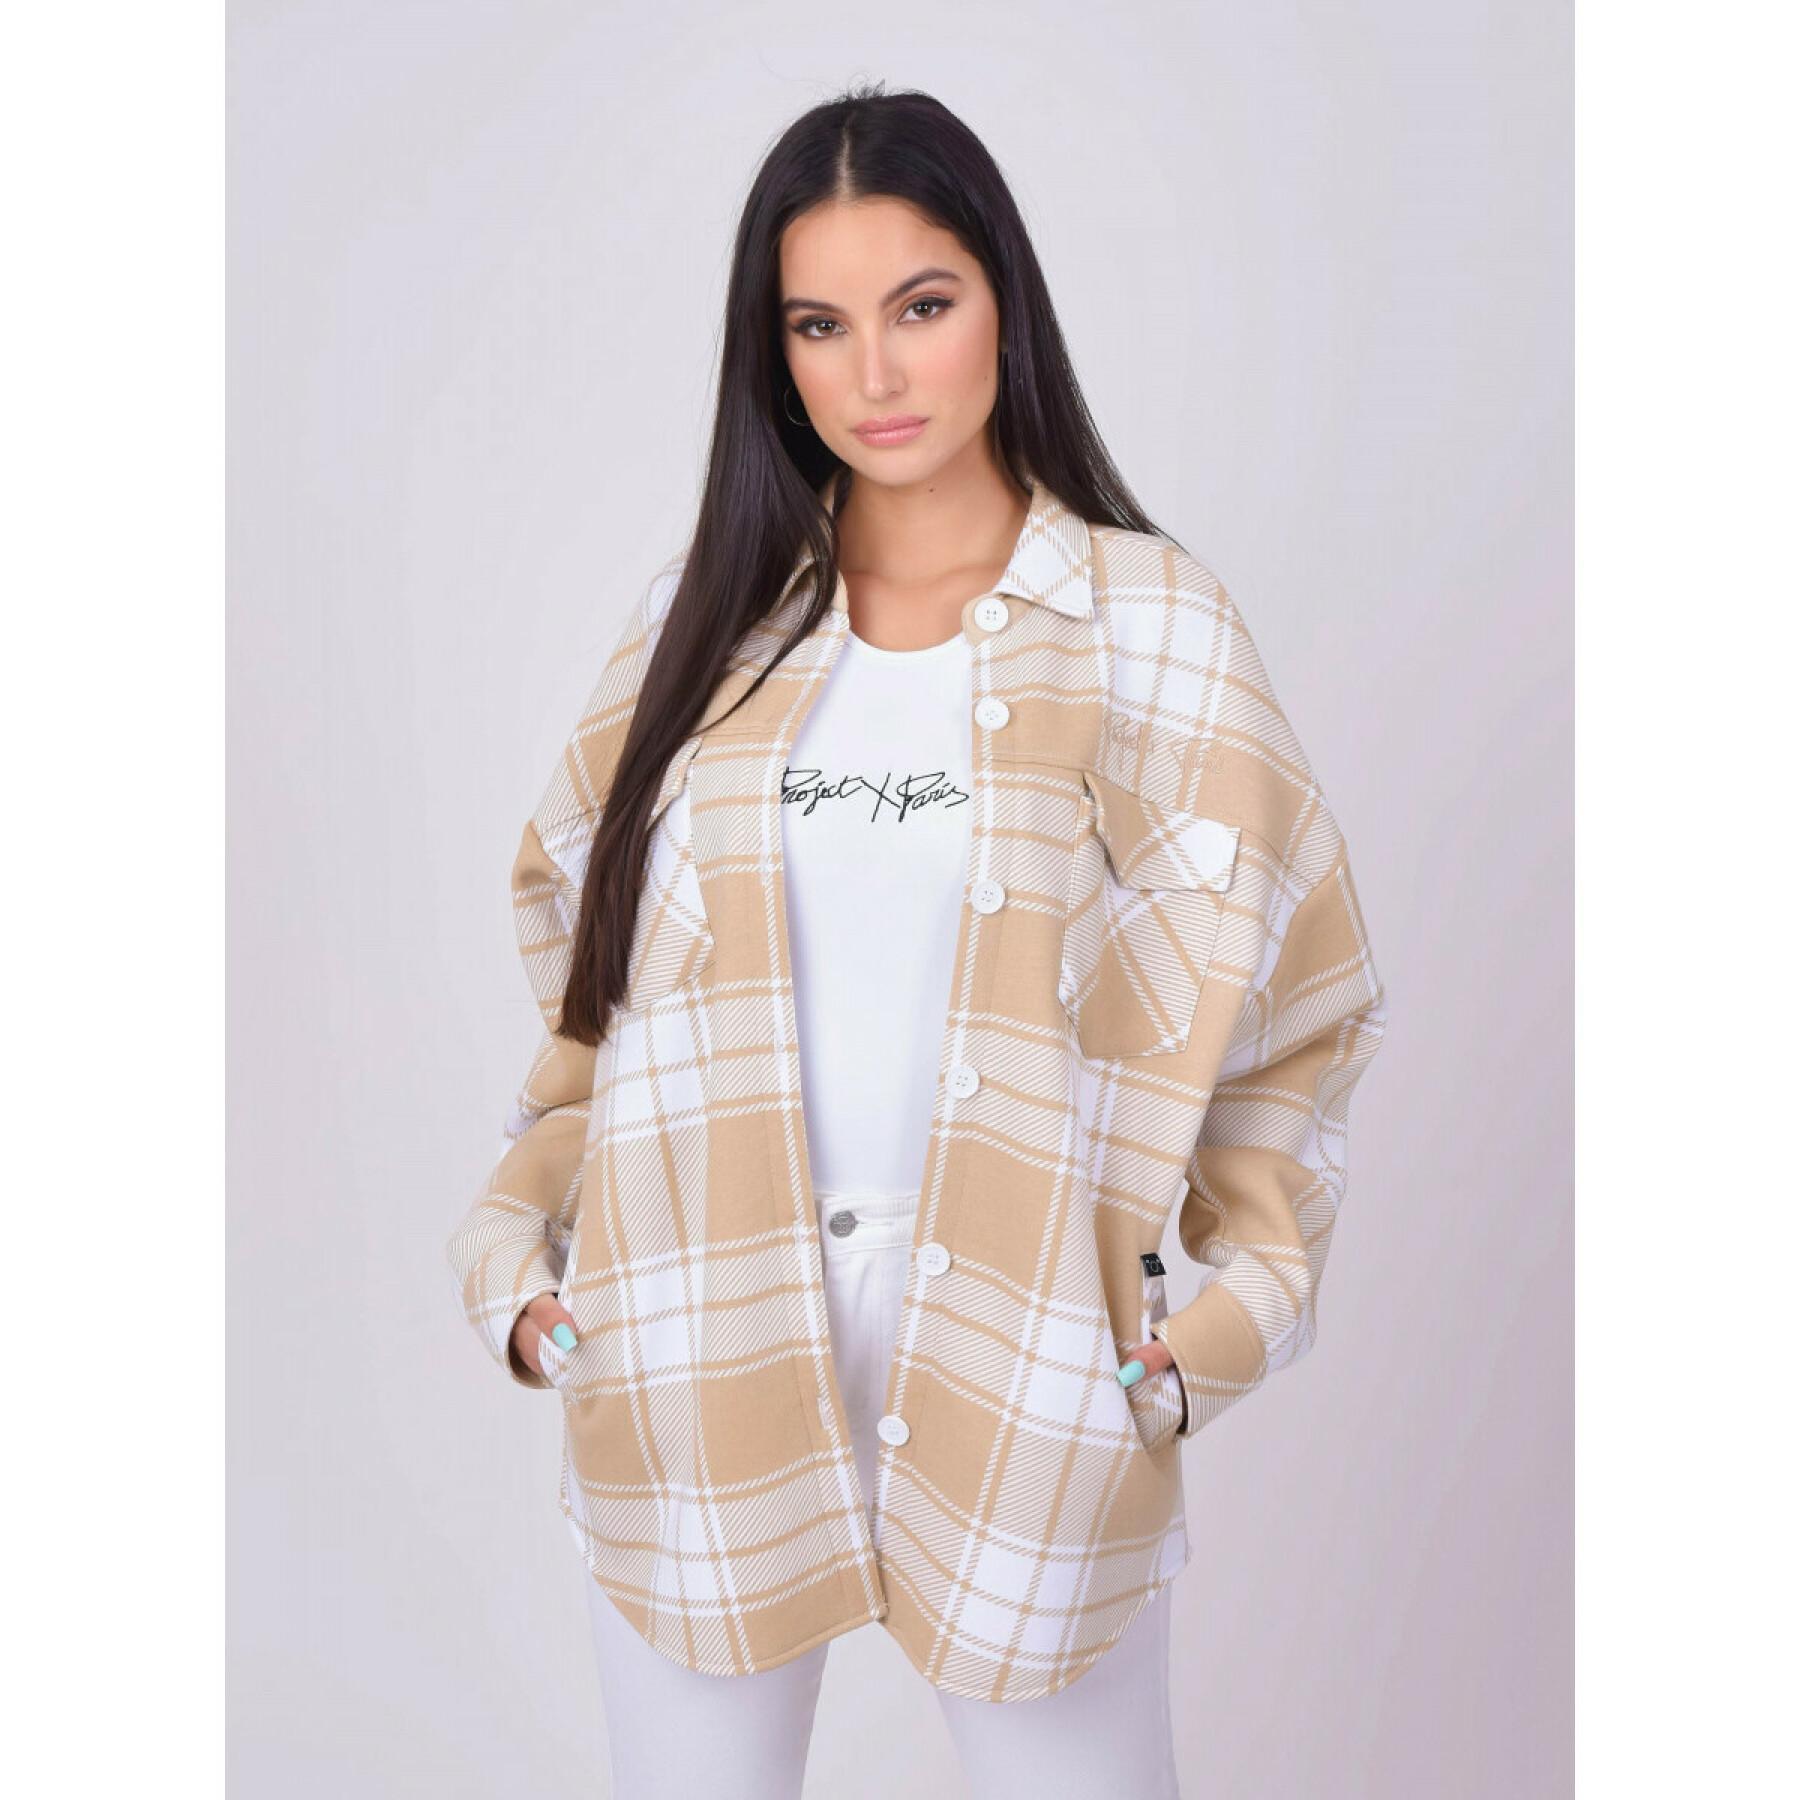 Women's two-tone checkered overshirt Project X Paris